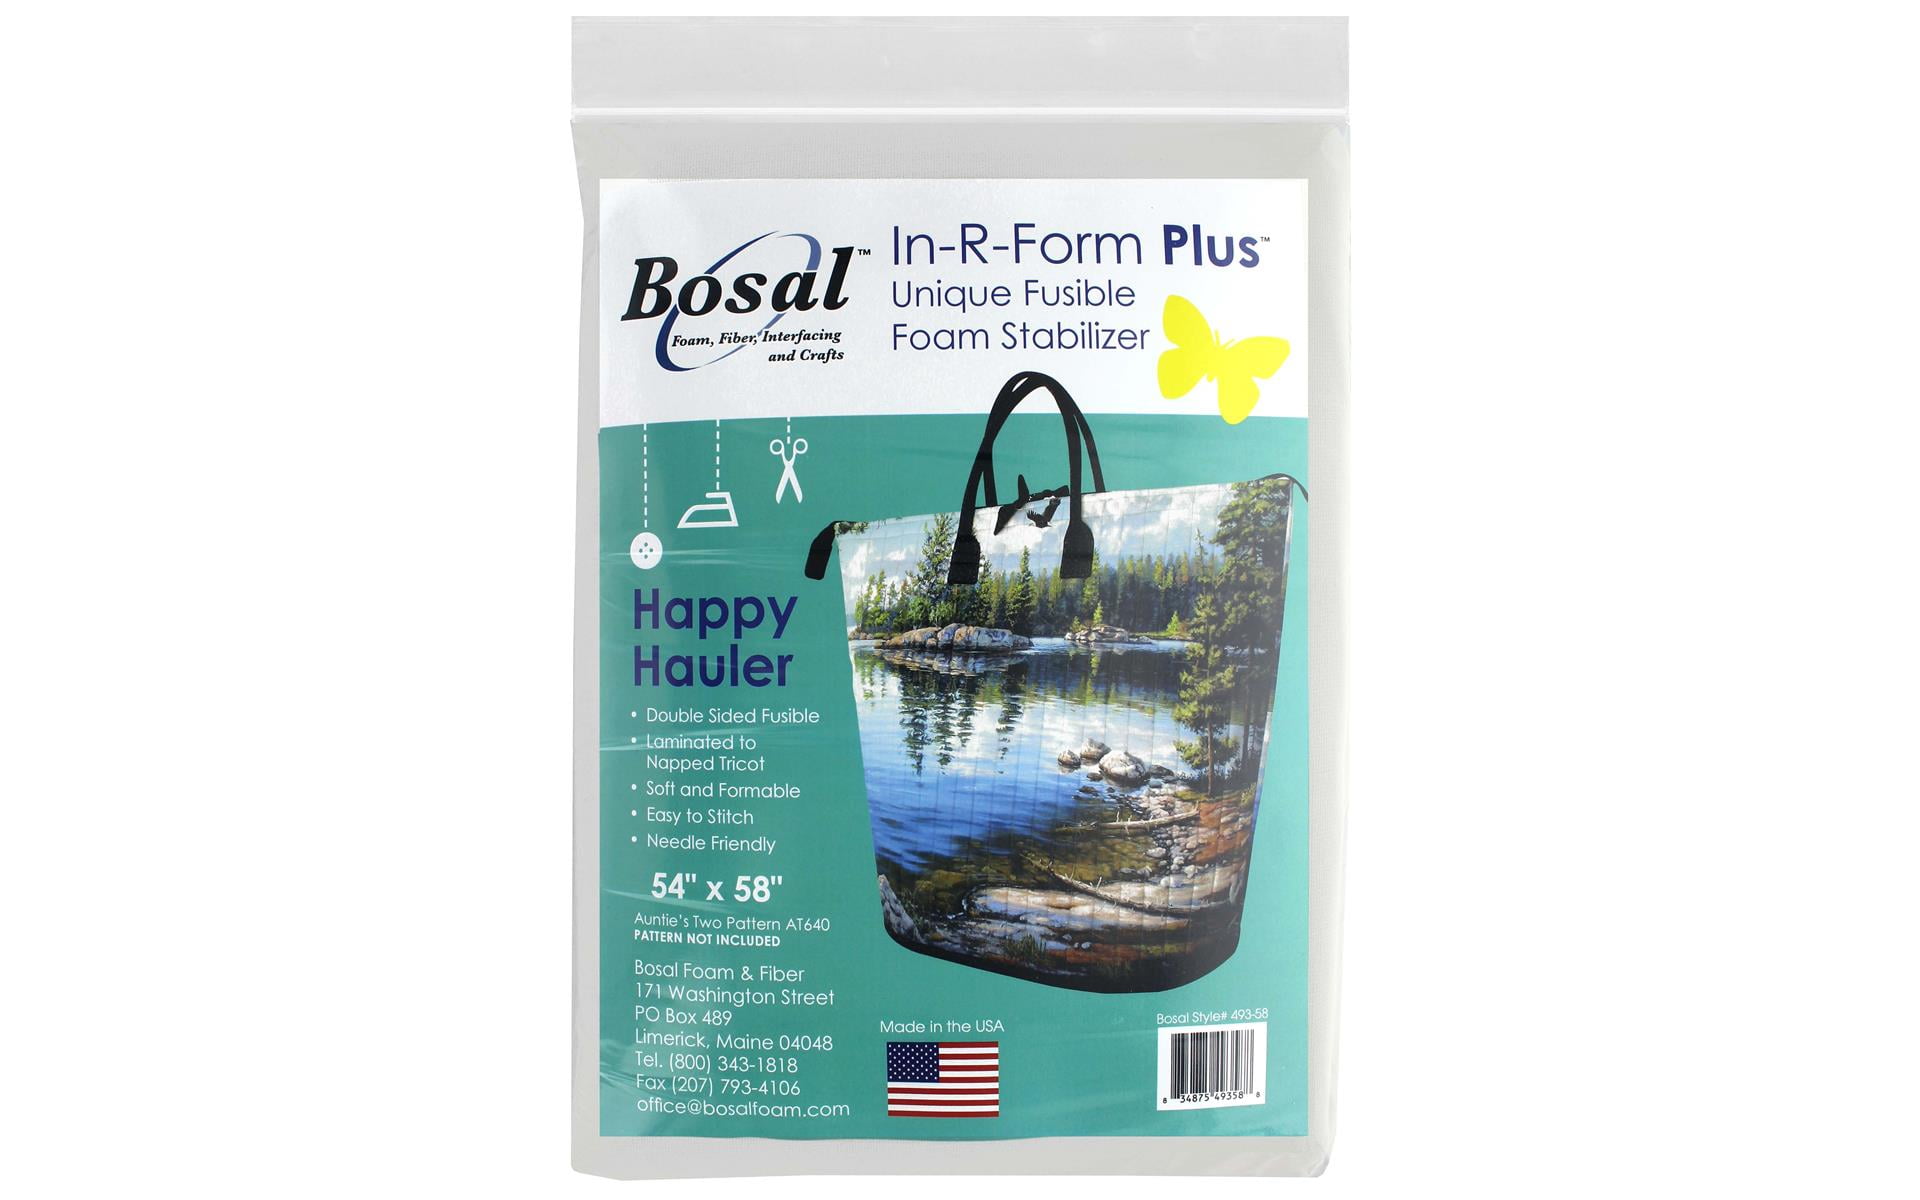 Bosal in-R-Form Plus Unique Fusible Foam Stabilizer, White Each (Pack of 2)